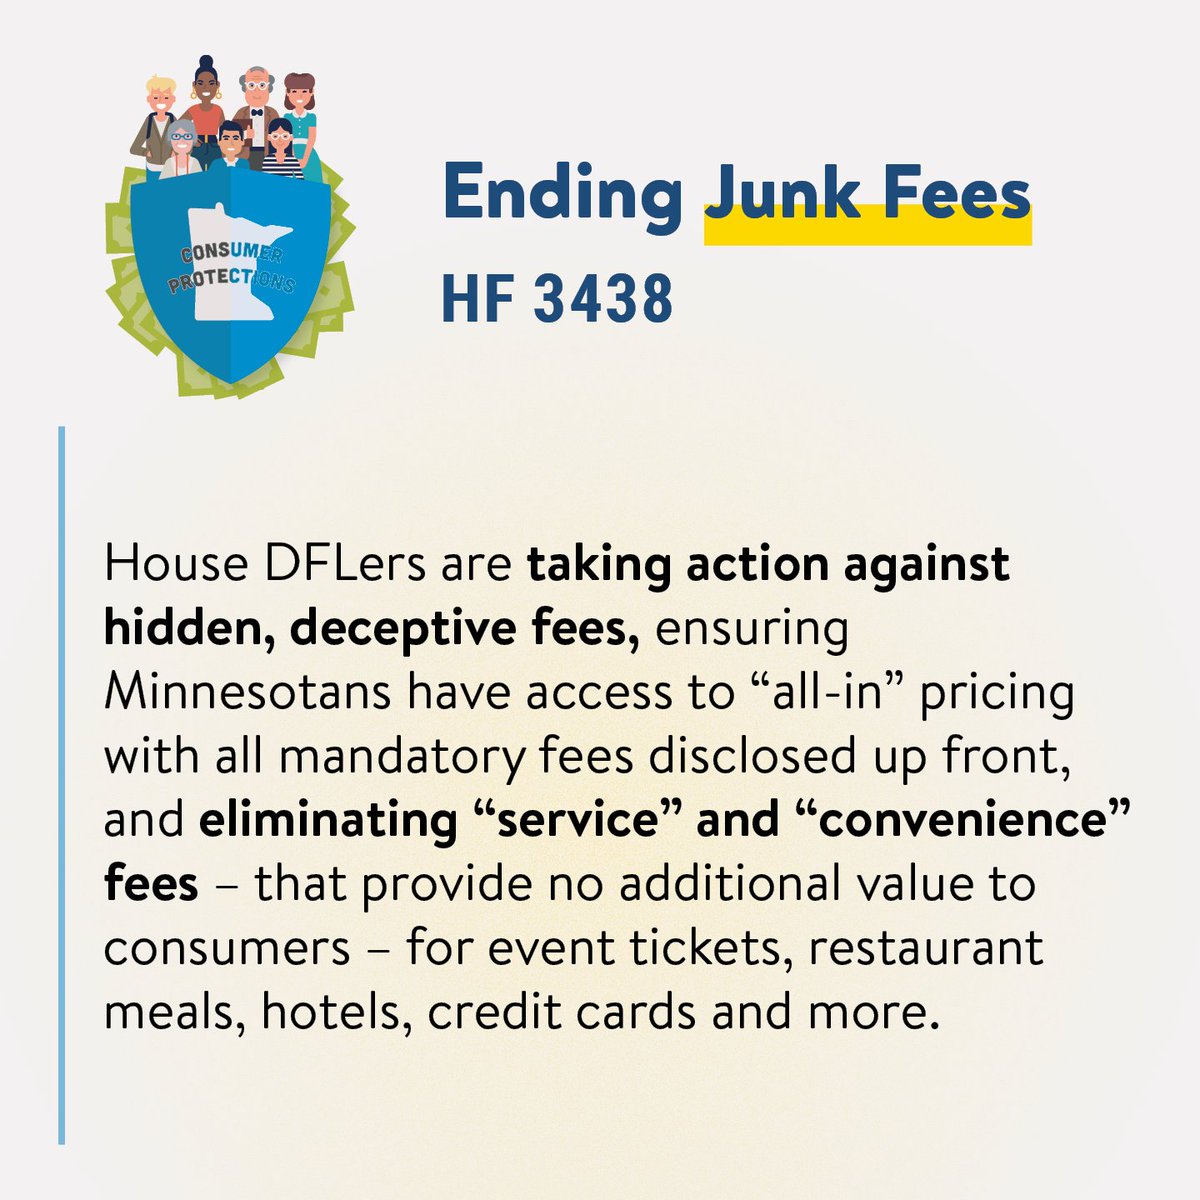 House Democrats are cracking down on deceptive, hidden 'junk' fees that cost the average Minnesota family $3,000 per year. The House just passed a bill to require upfront, 'all-in' pricing to be disclosed, and eliminate charges that provide no value to consumers. 🧾👨🏾‍💻💸 #mnleg